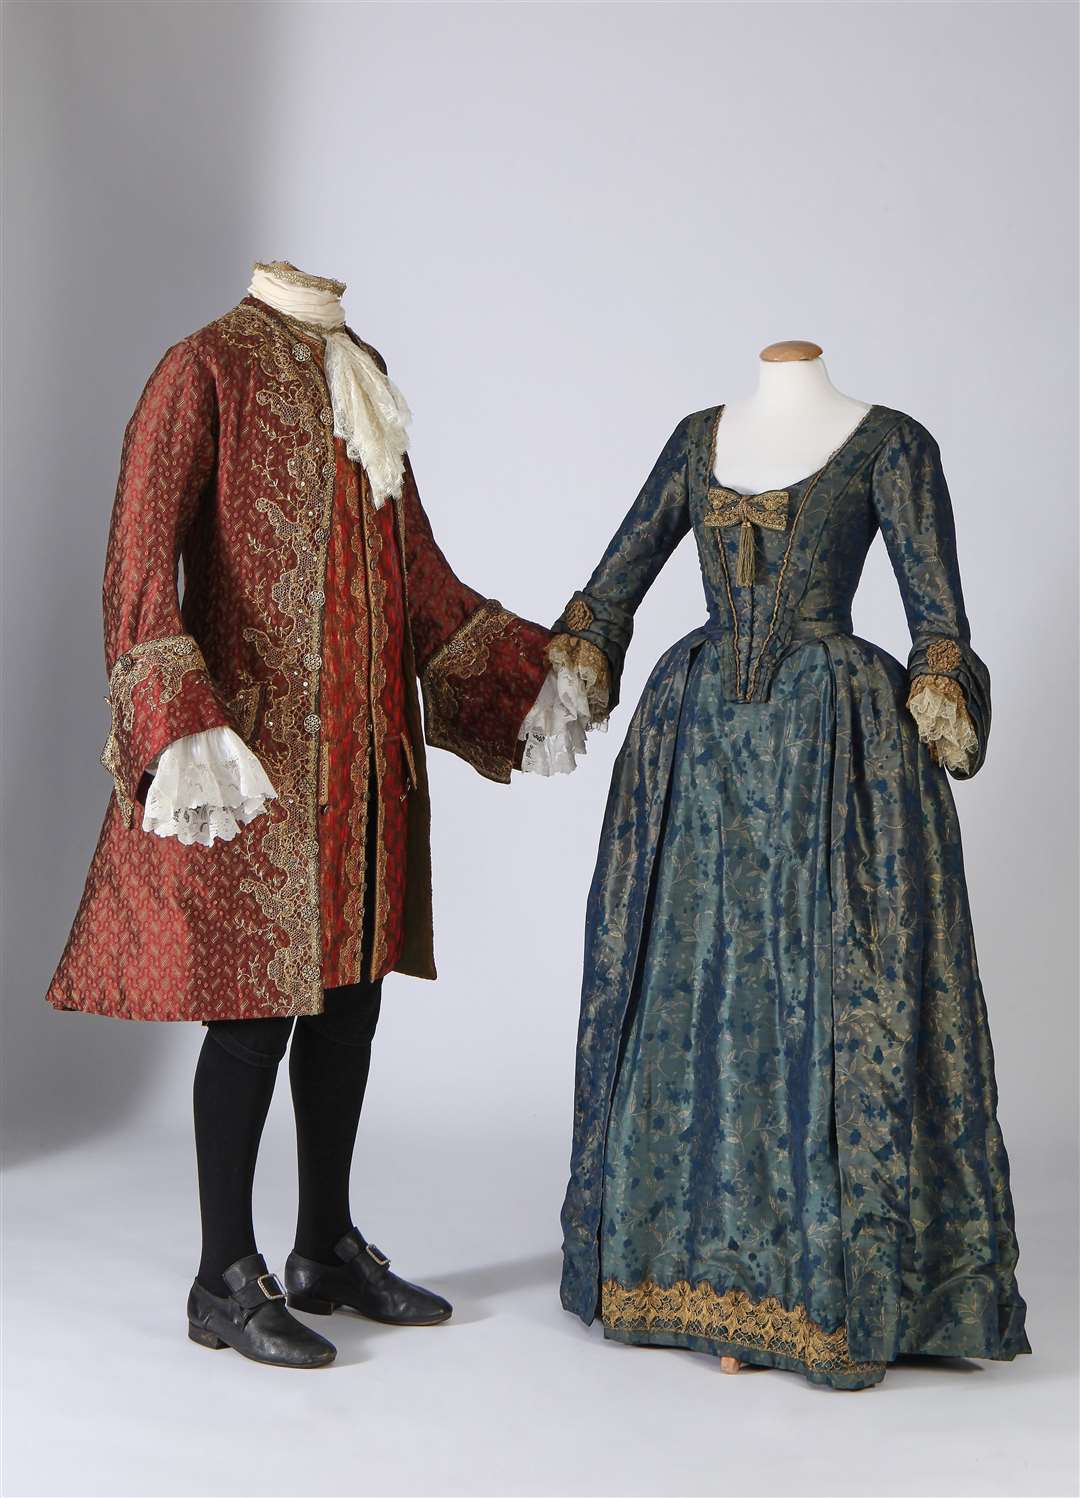 Heath Ledger and Sienna Miller’s costumes from 2004’s Casanova (Cosprop/Kerry Taylor Auctions/PA)